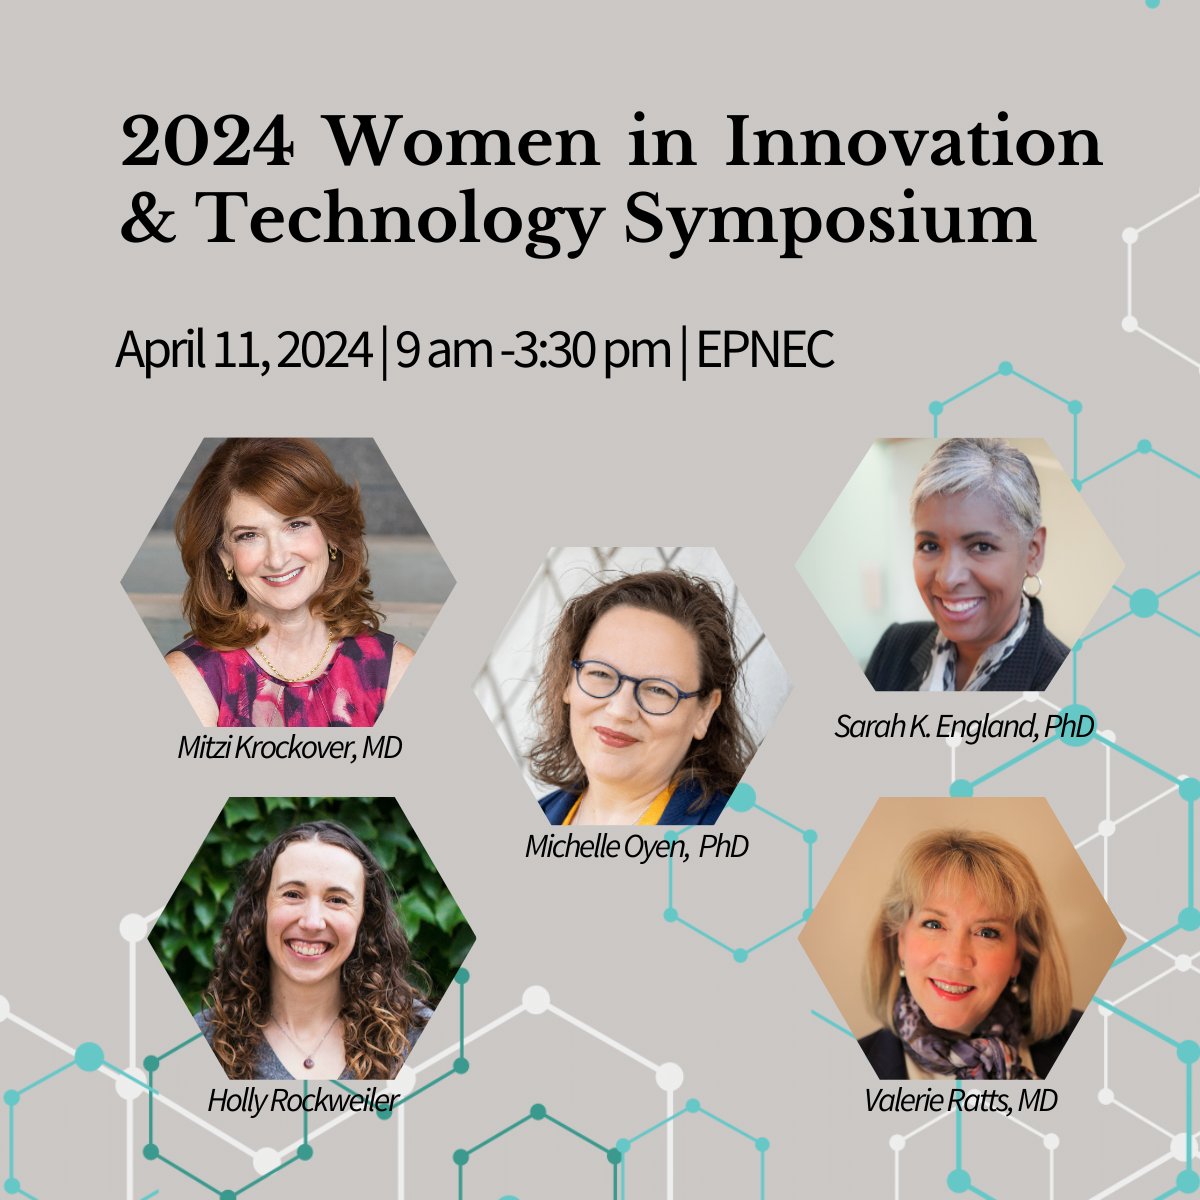 It's #WomensHistoryMonth Join us April 11th for the WIT Symposium, where 5 women who are changing the landscape of women’s healthcare will share their insights on this pressing topic, from research and entrepreneurship to investment and advocacy. bit.ly/3P6SrXL